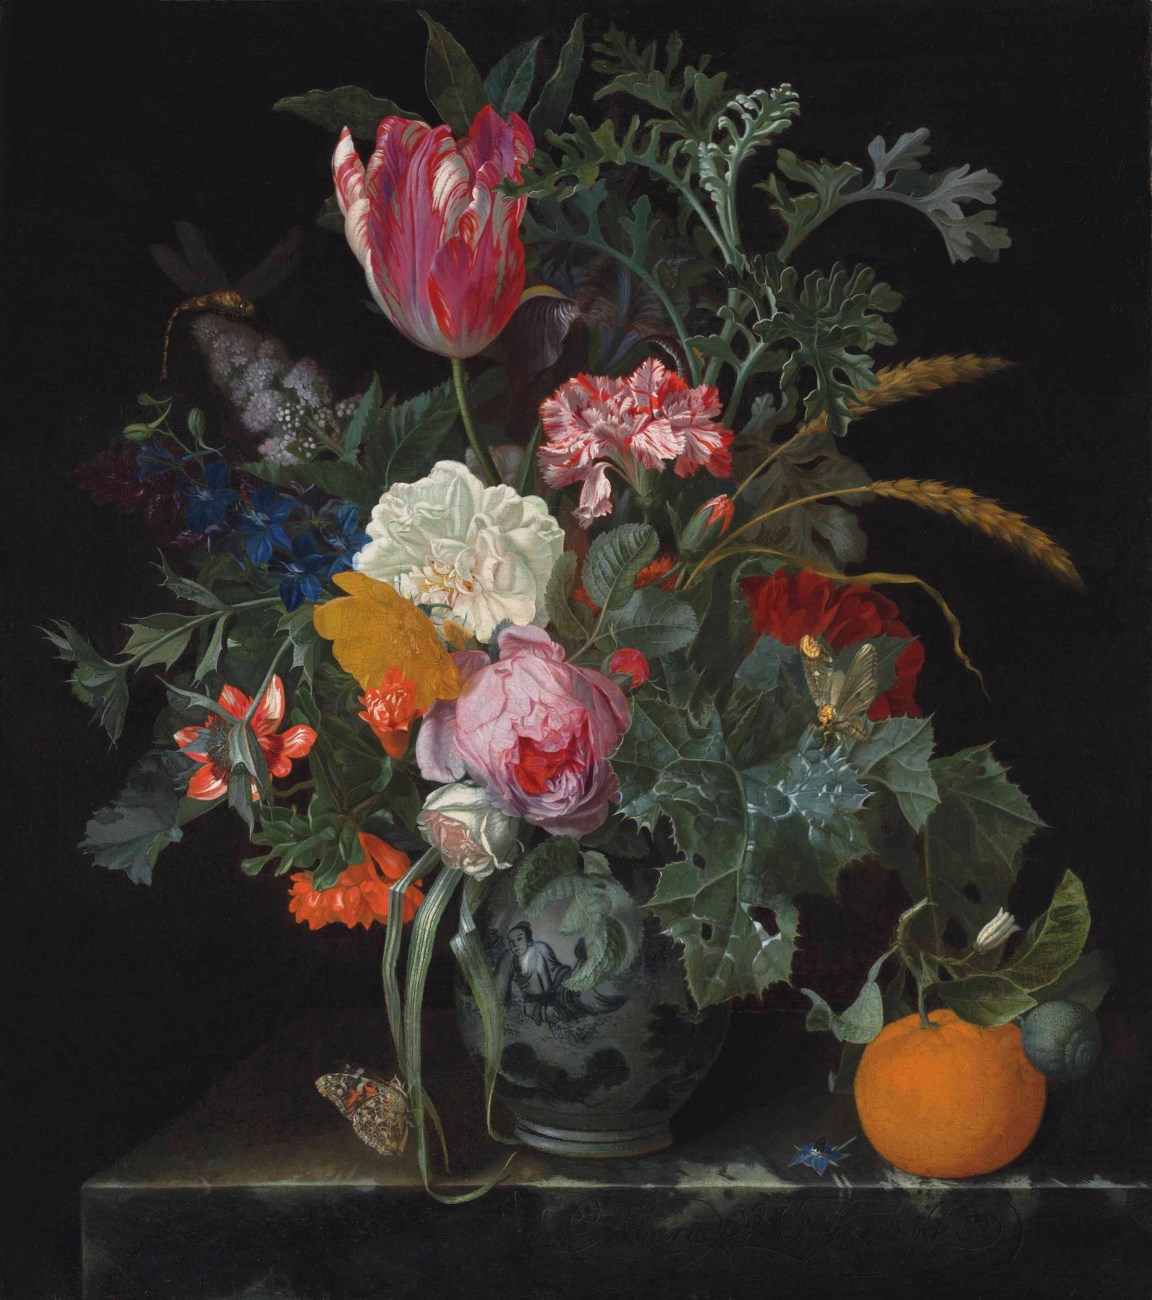 Bouquet of Flowers by Maria van Oosterwijck - second half of 17th century - 56.5 x 50.1 cm private collection